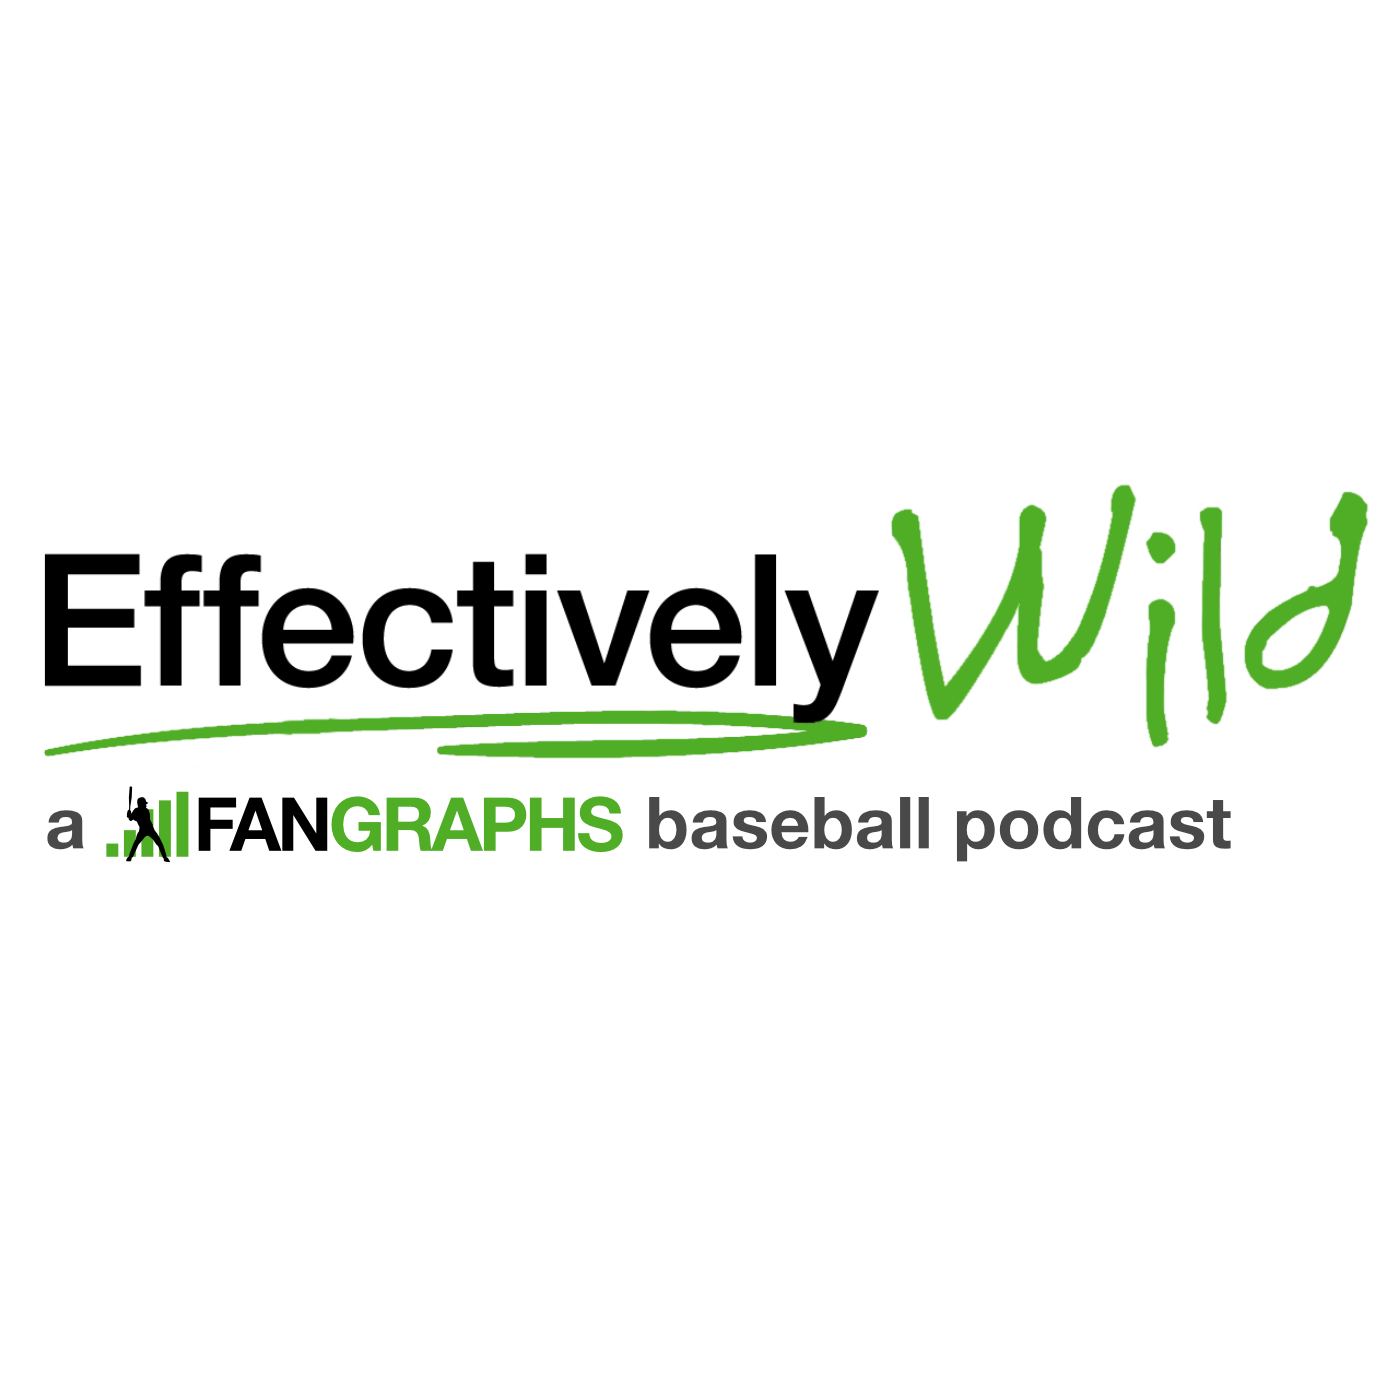 A highlight from Effectively Wild Episode 1877: The 10th Anniversary Retrospective